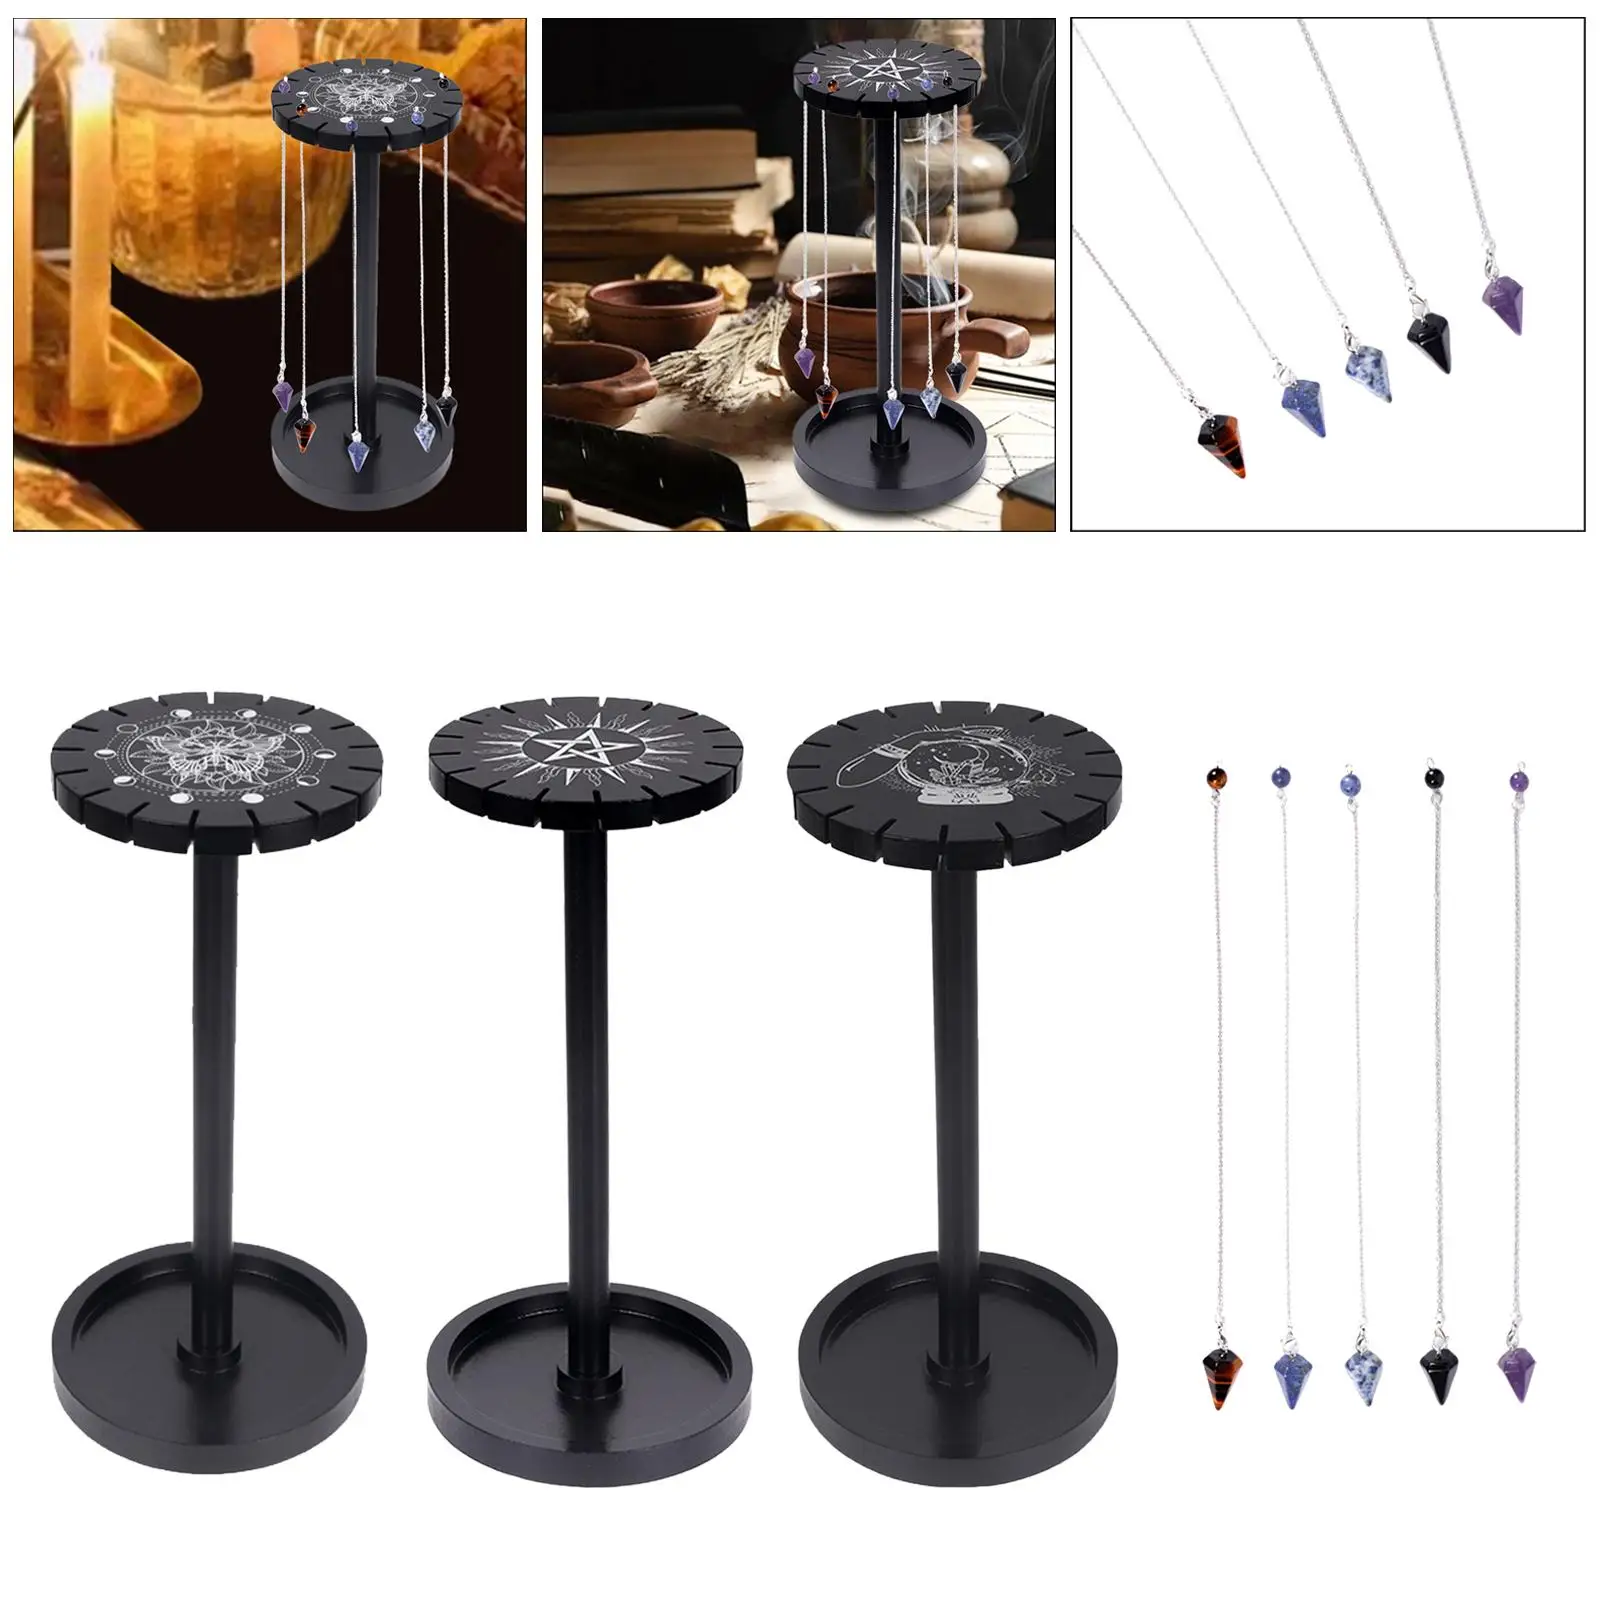 Multipurpose Wooden Pendulum Display Frame Storage Rack Holder stand Necklace Organizer for Mineral Ores Sphere Home Decor